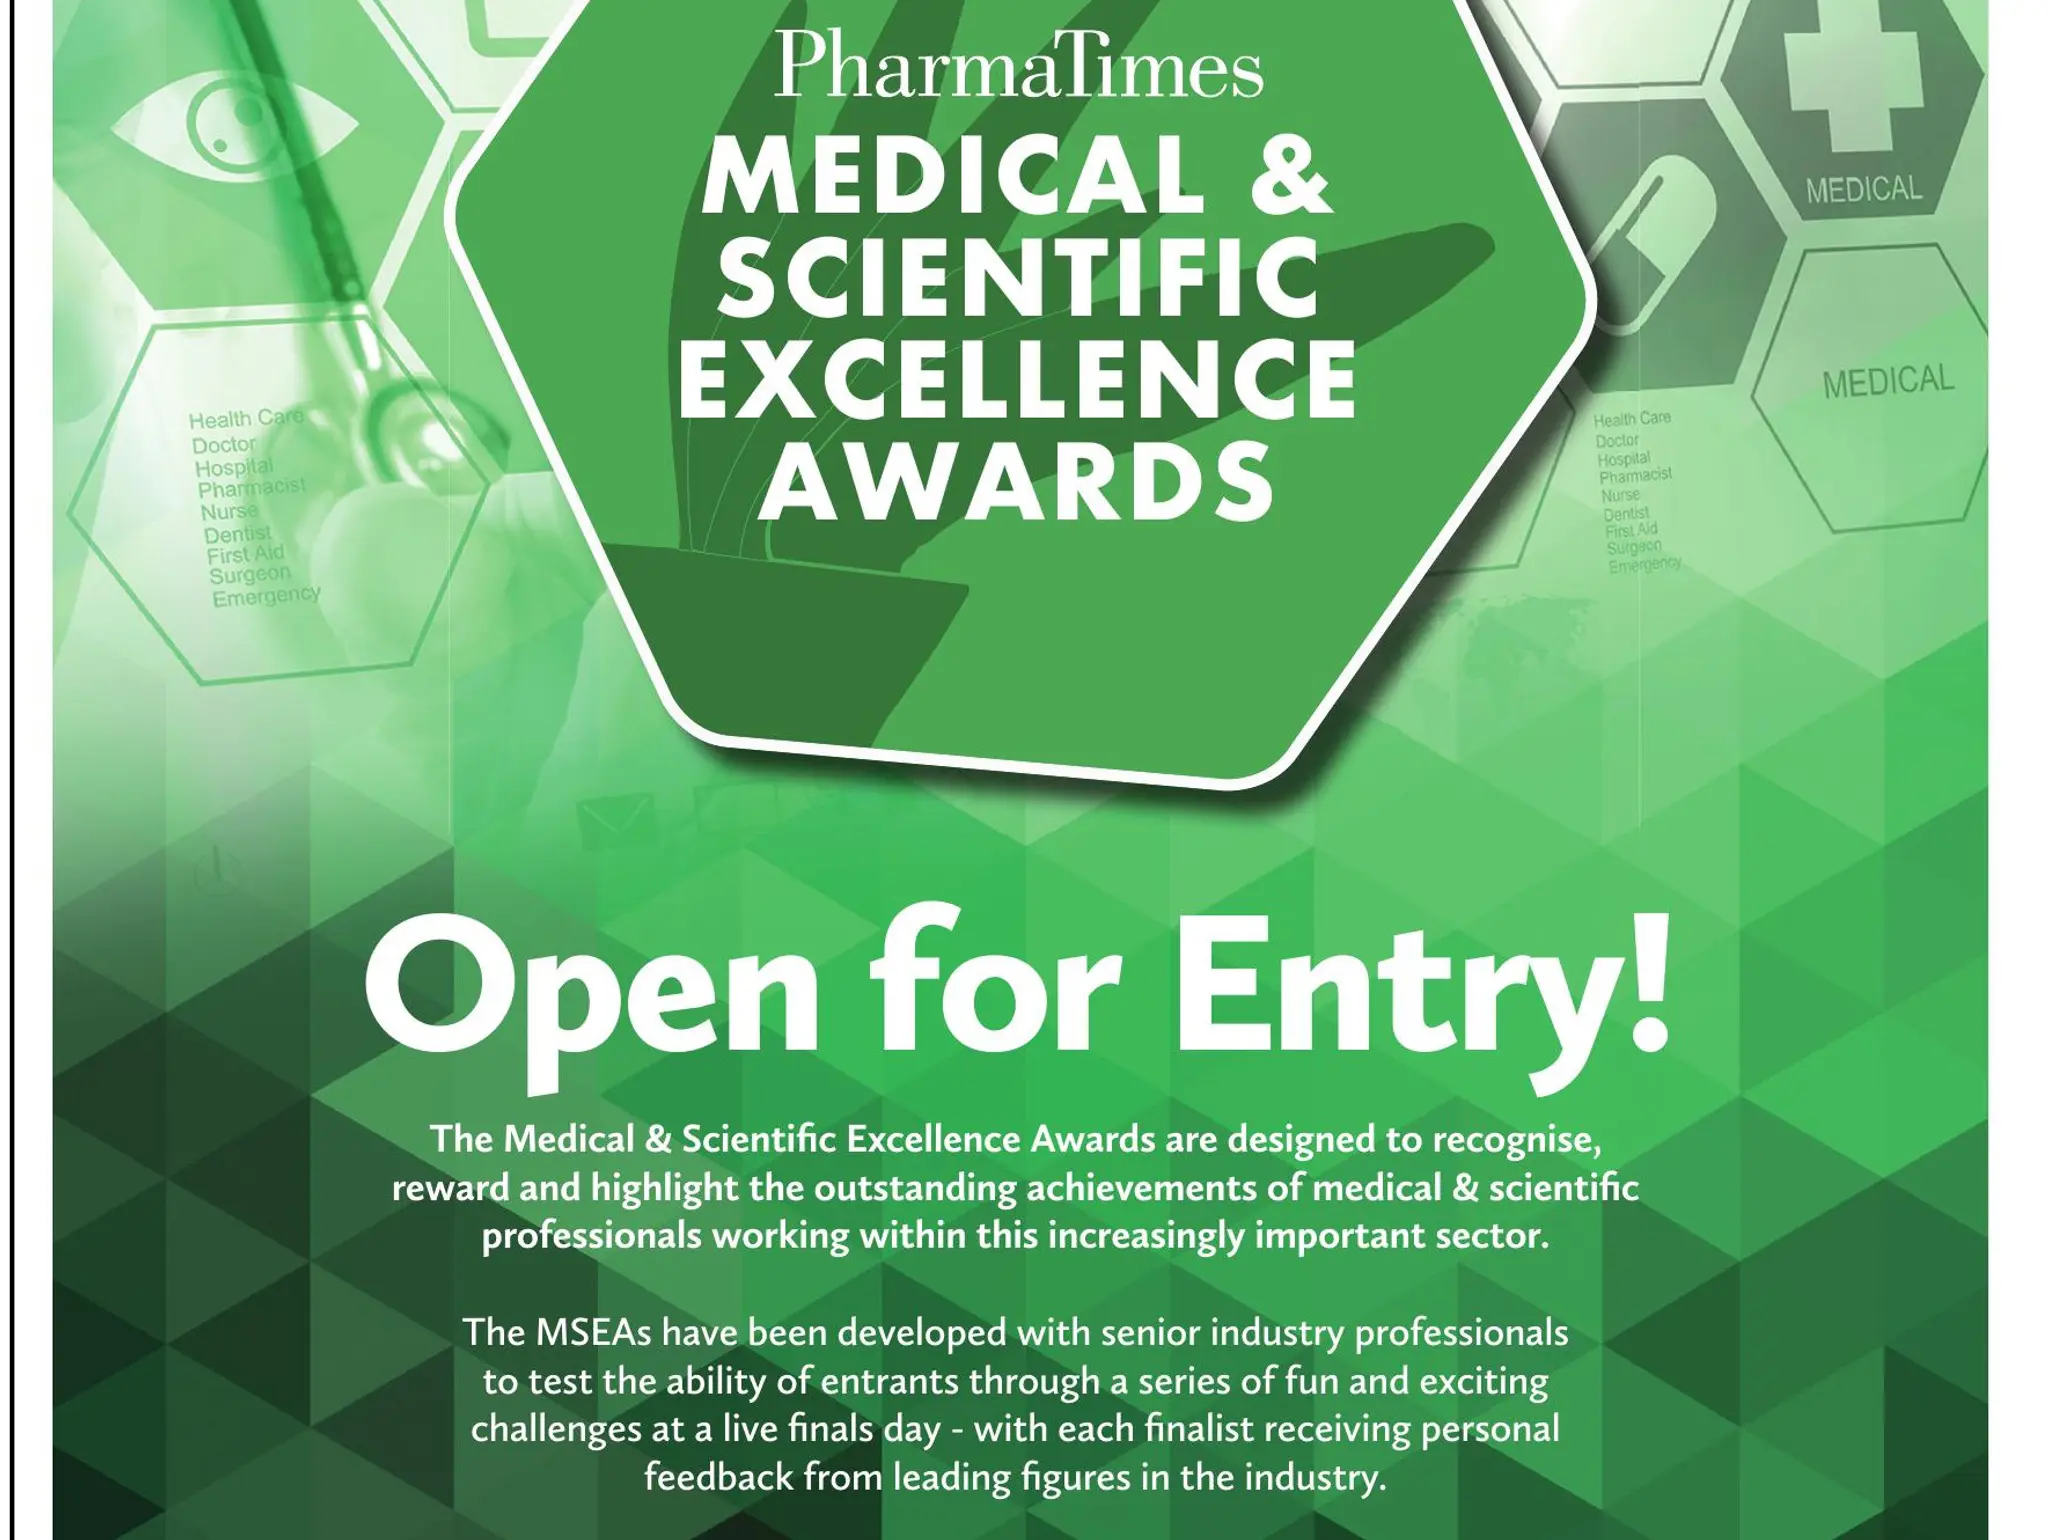 MEDICAL & SCIENTIFIC EXCELLENCE AWARDS